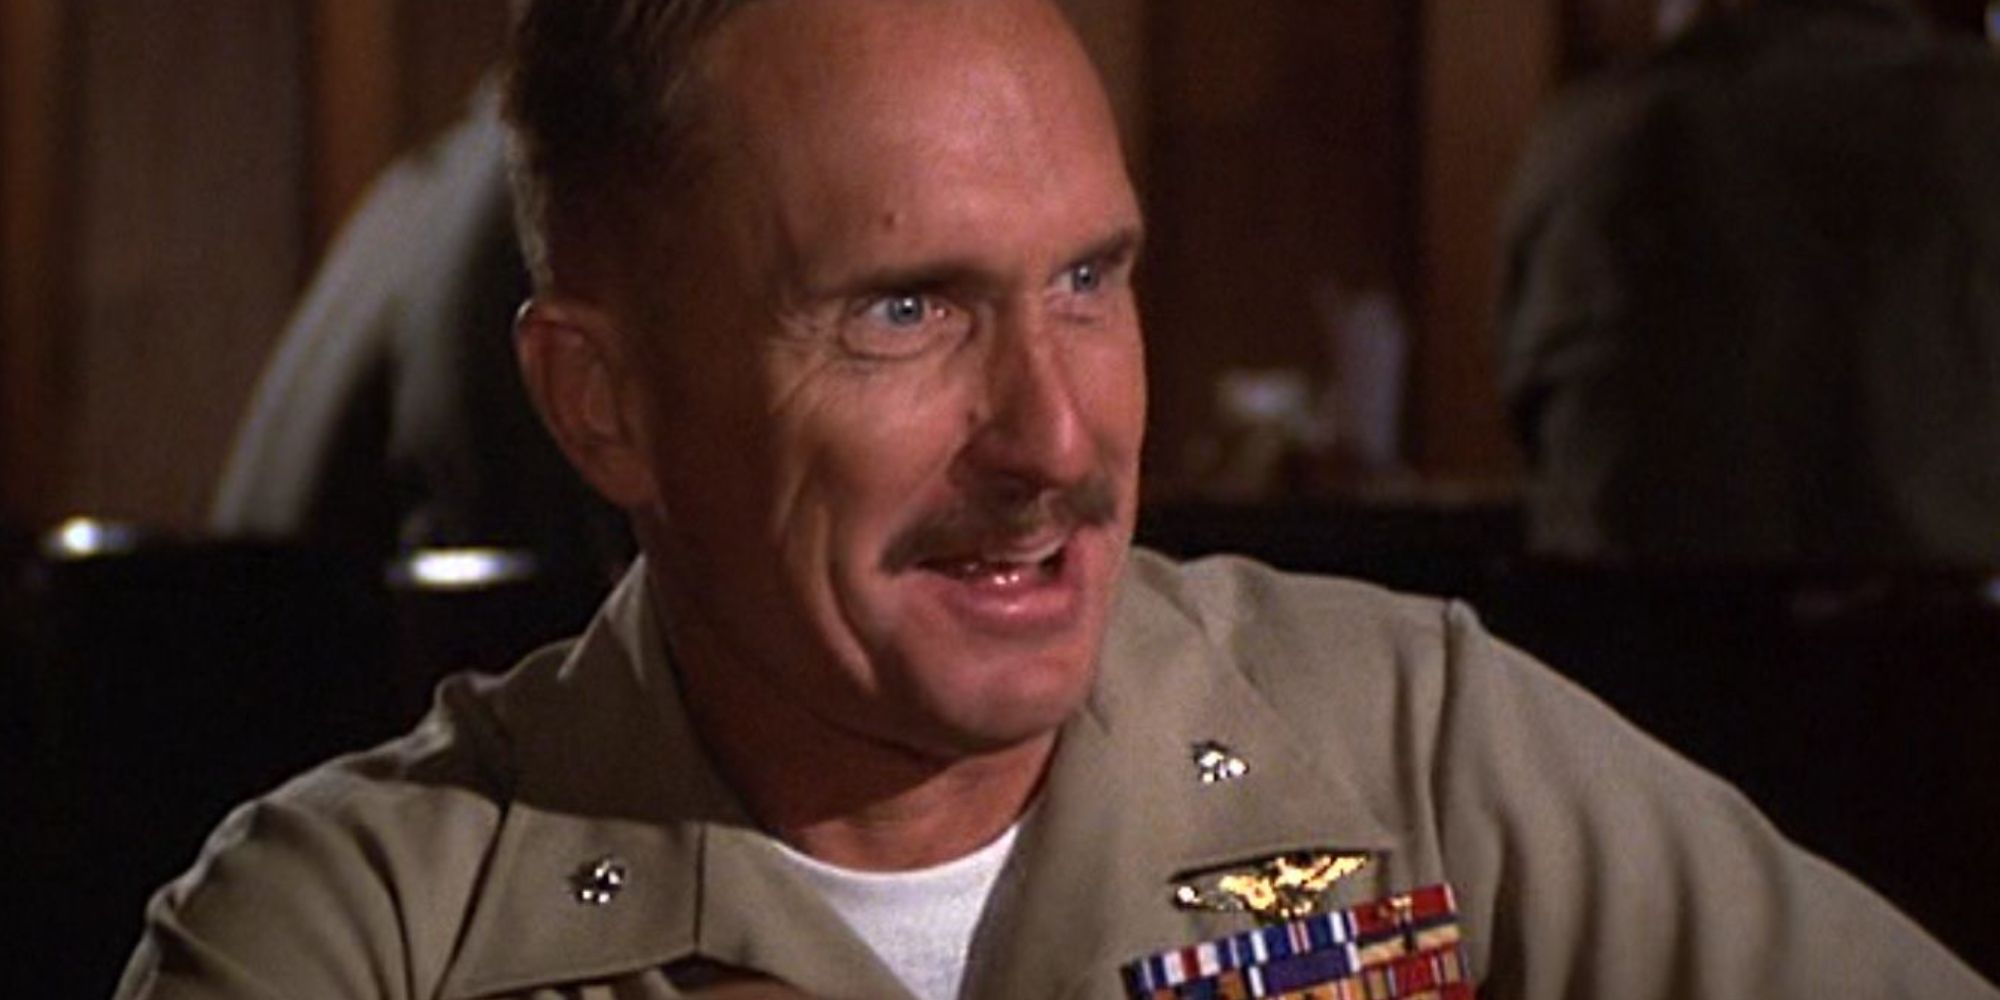 Robert Duvall as Bull Meechum, wearing his uniform and looking shocked in The Great Santini